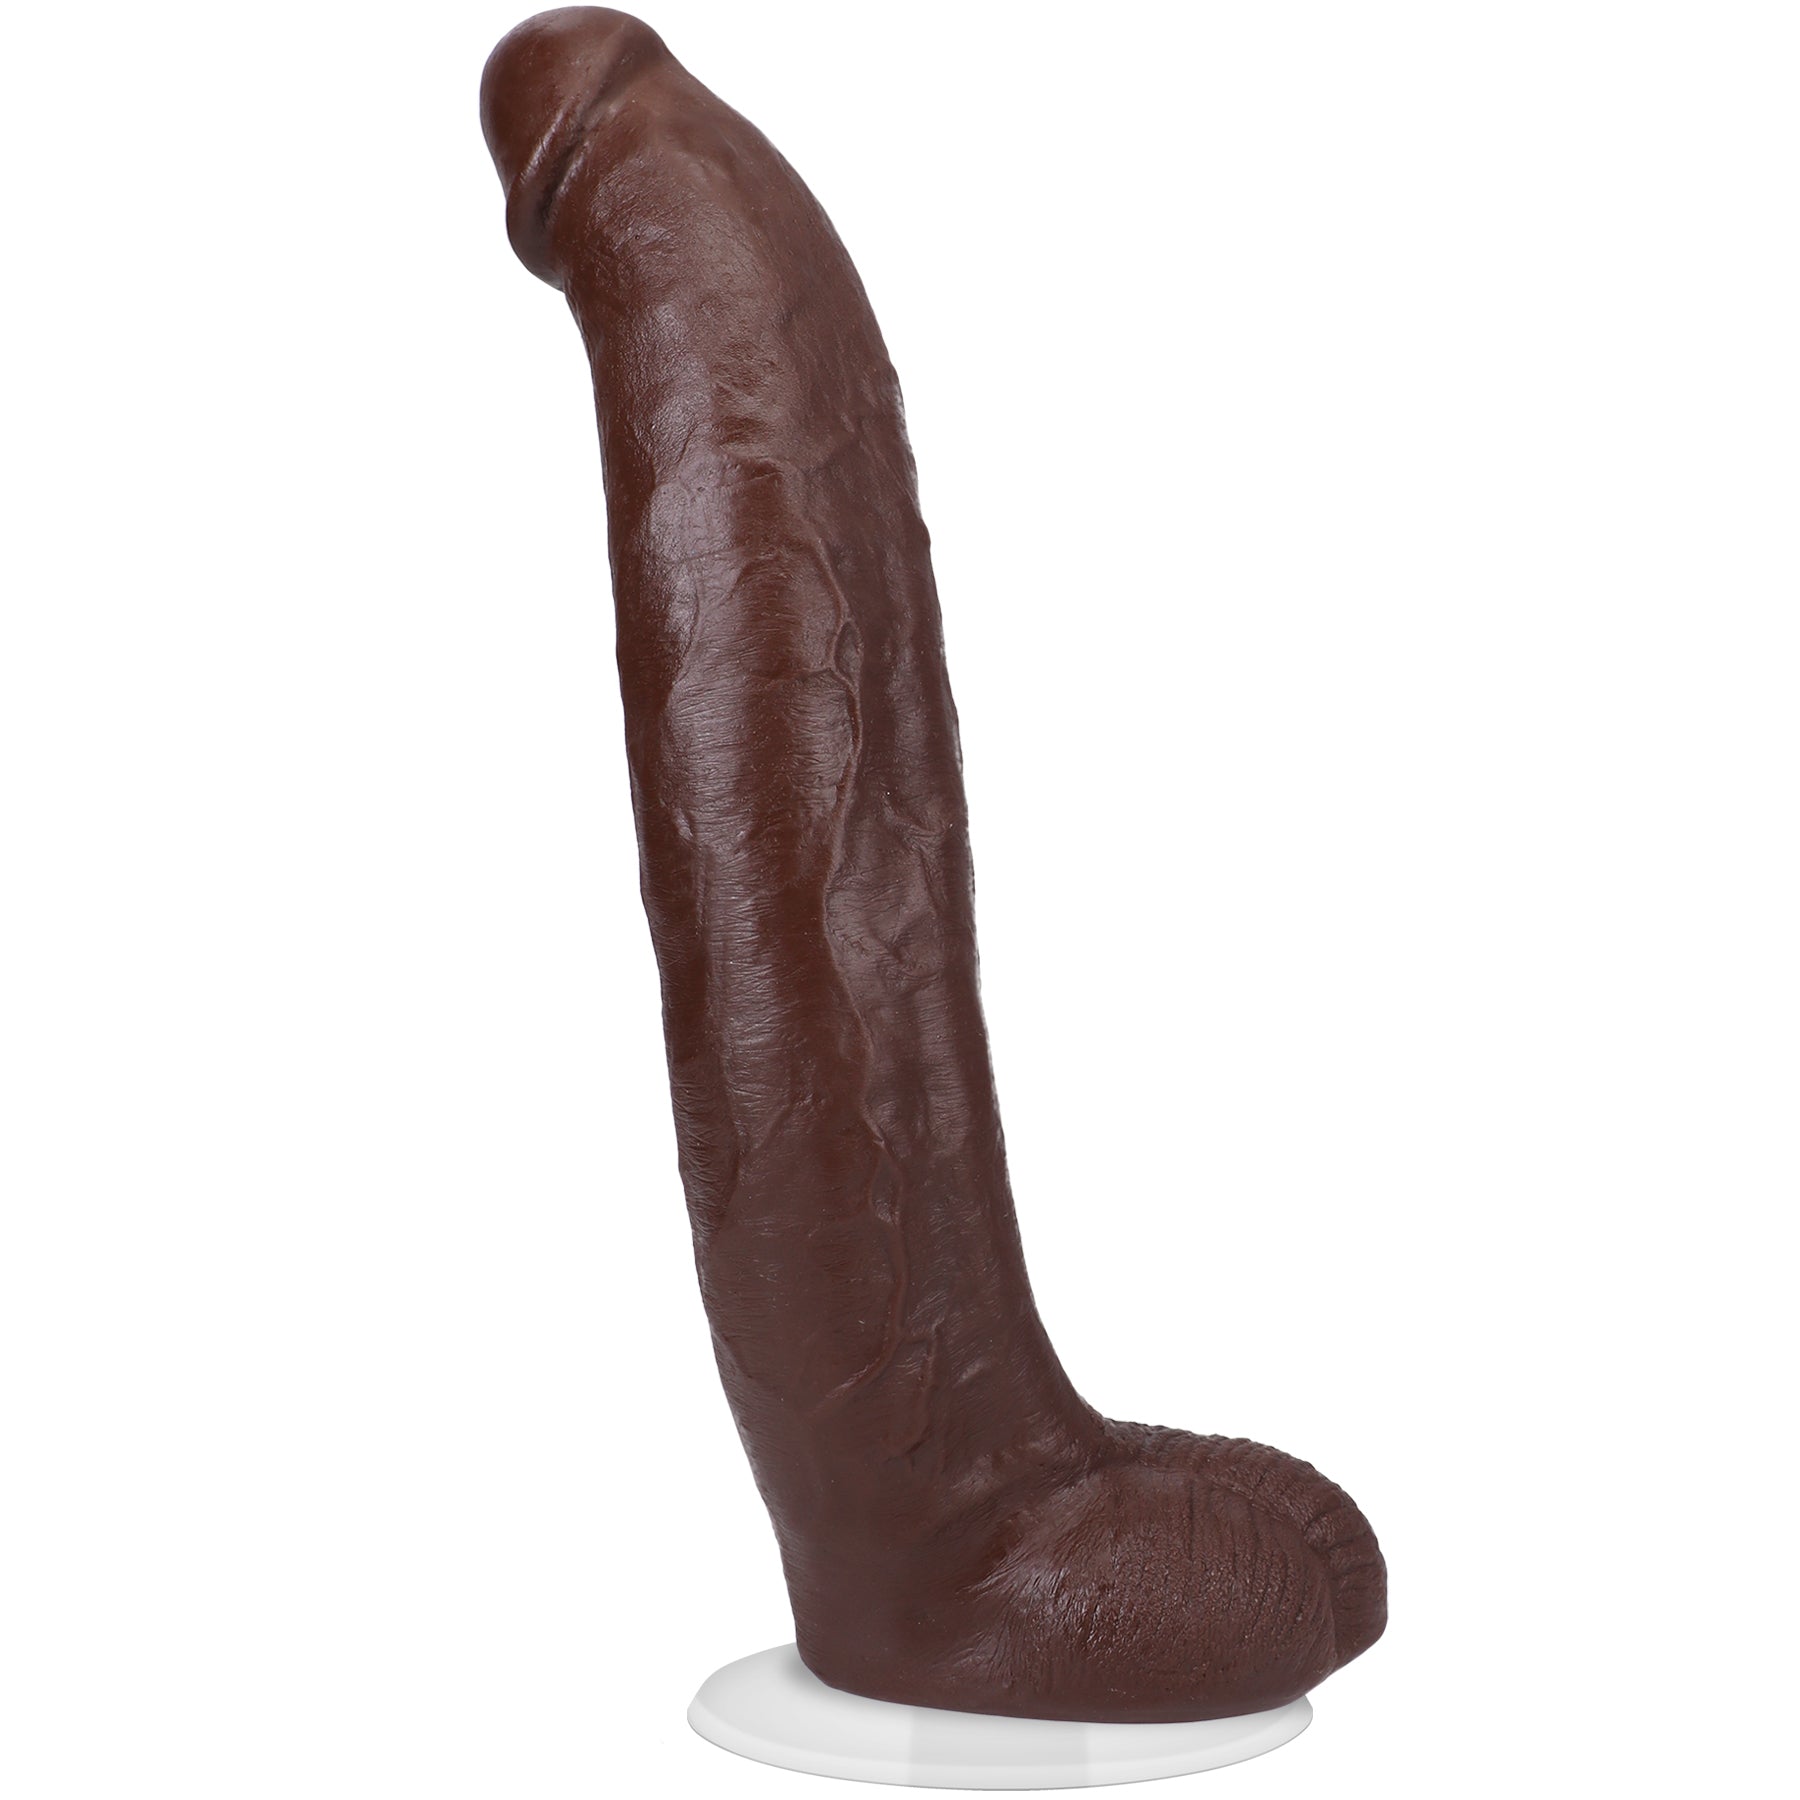 Signature Cocks - Brickzilla - 13 Inch Ultraskyn  Cock With Removable Vac-U-Lock Suction Cup -  Chocolate-7